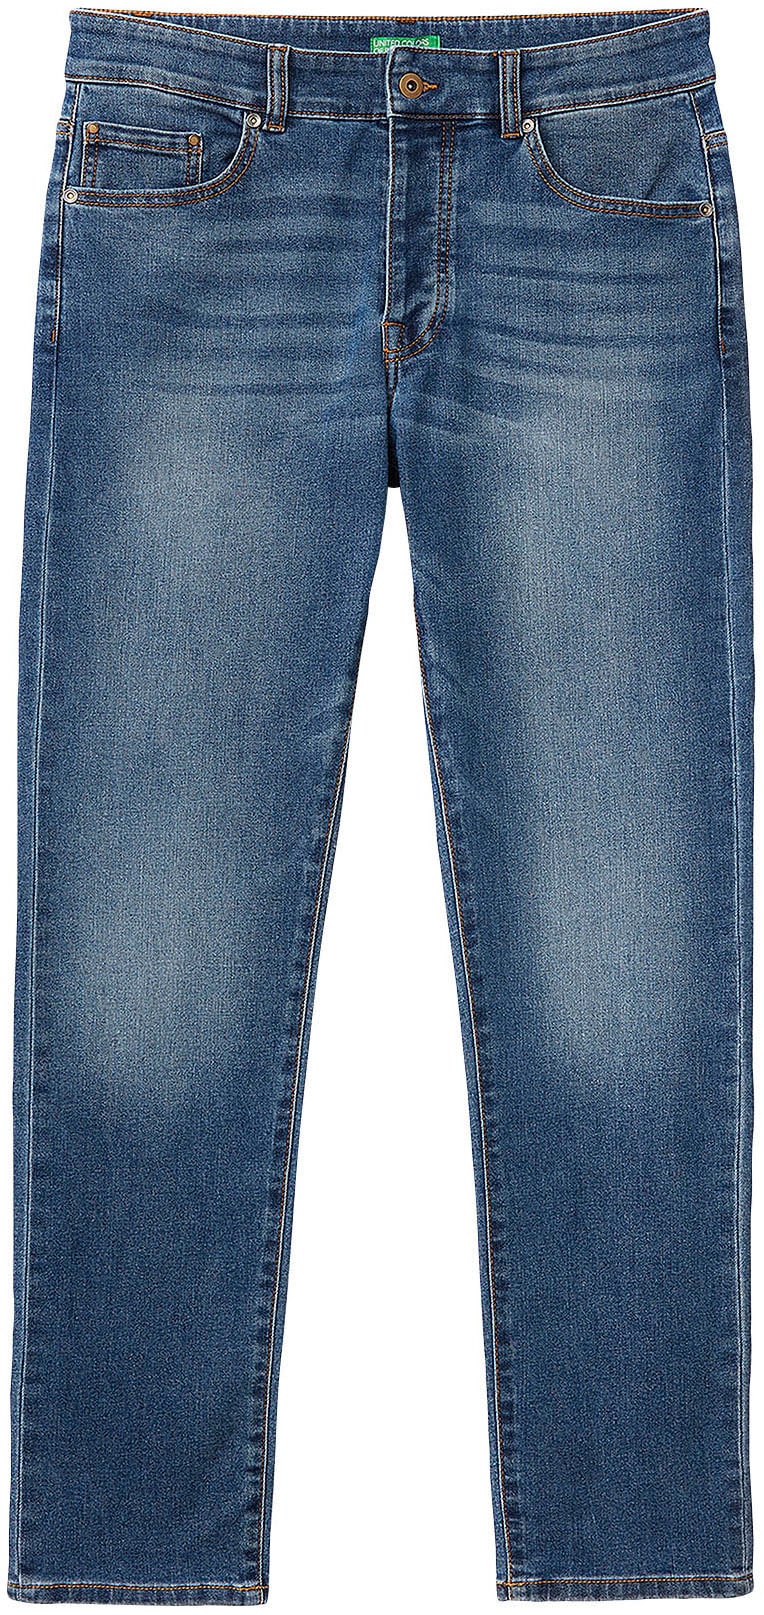 United Colors of Benetton Stretch-Jeans von United Colors of Benetton